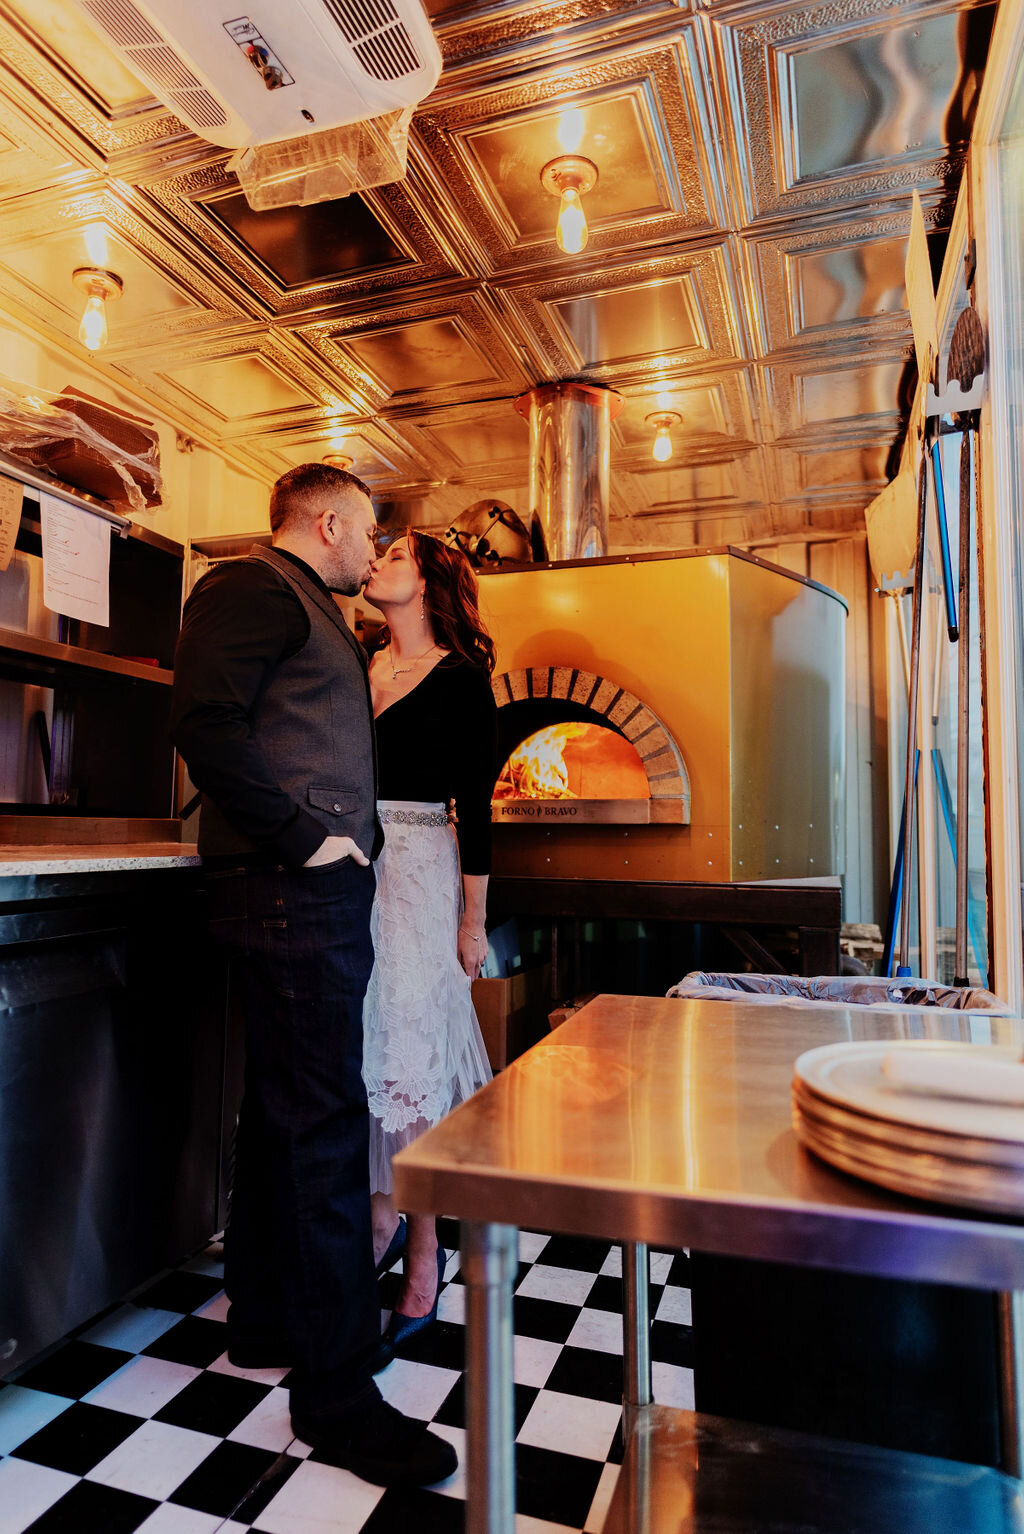 Super Fun, Nontraditional Wedding at Alter Brewing captured by Mackenzie Maeder featured on CHI thee WED